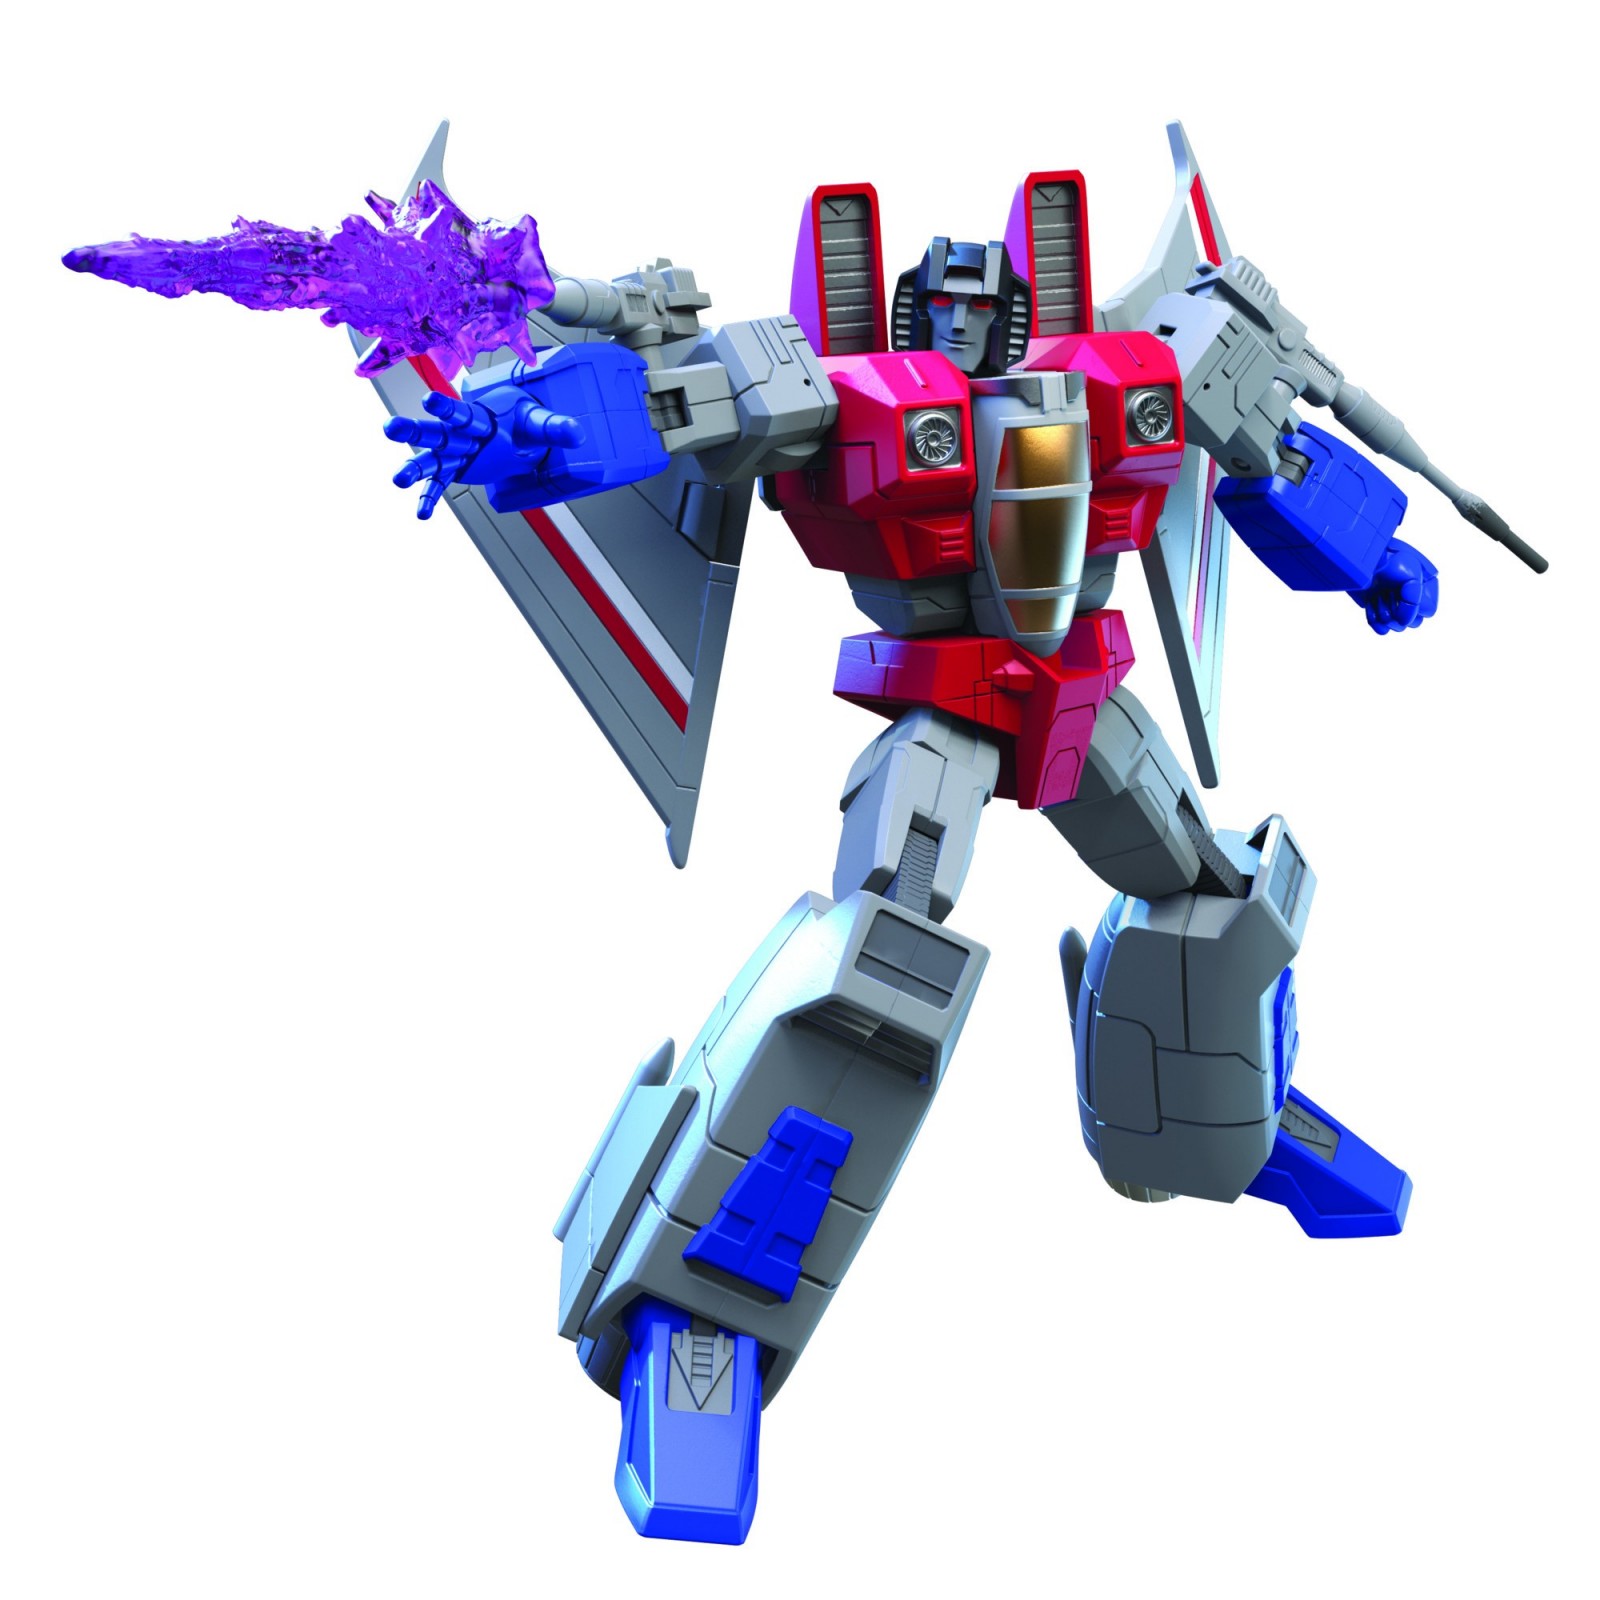 Transformers News: G1 Starscream and Bumblebee Revealed For Transformers R.E.D Line